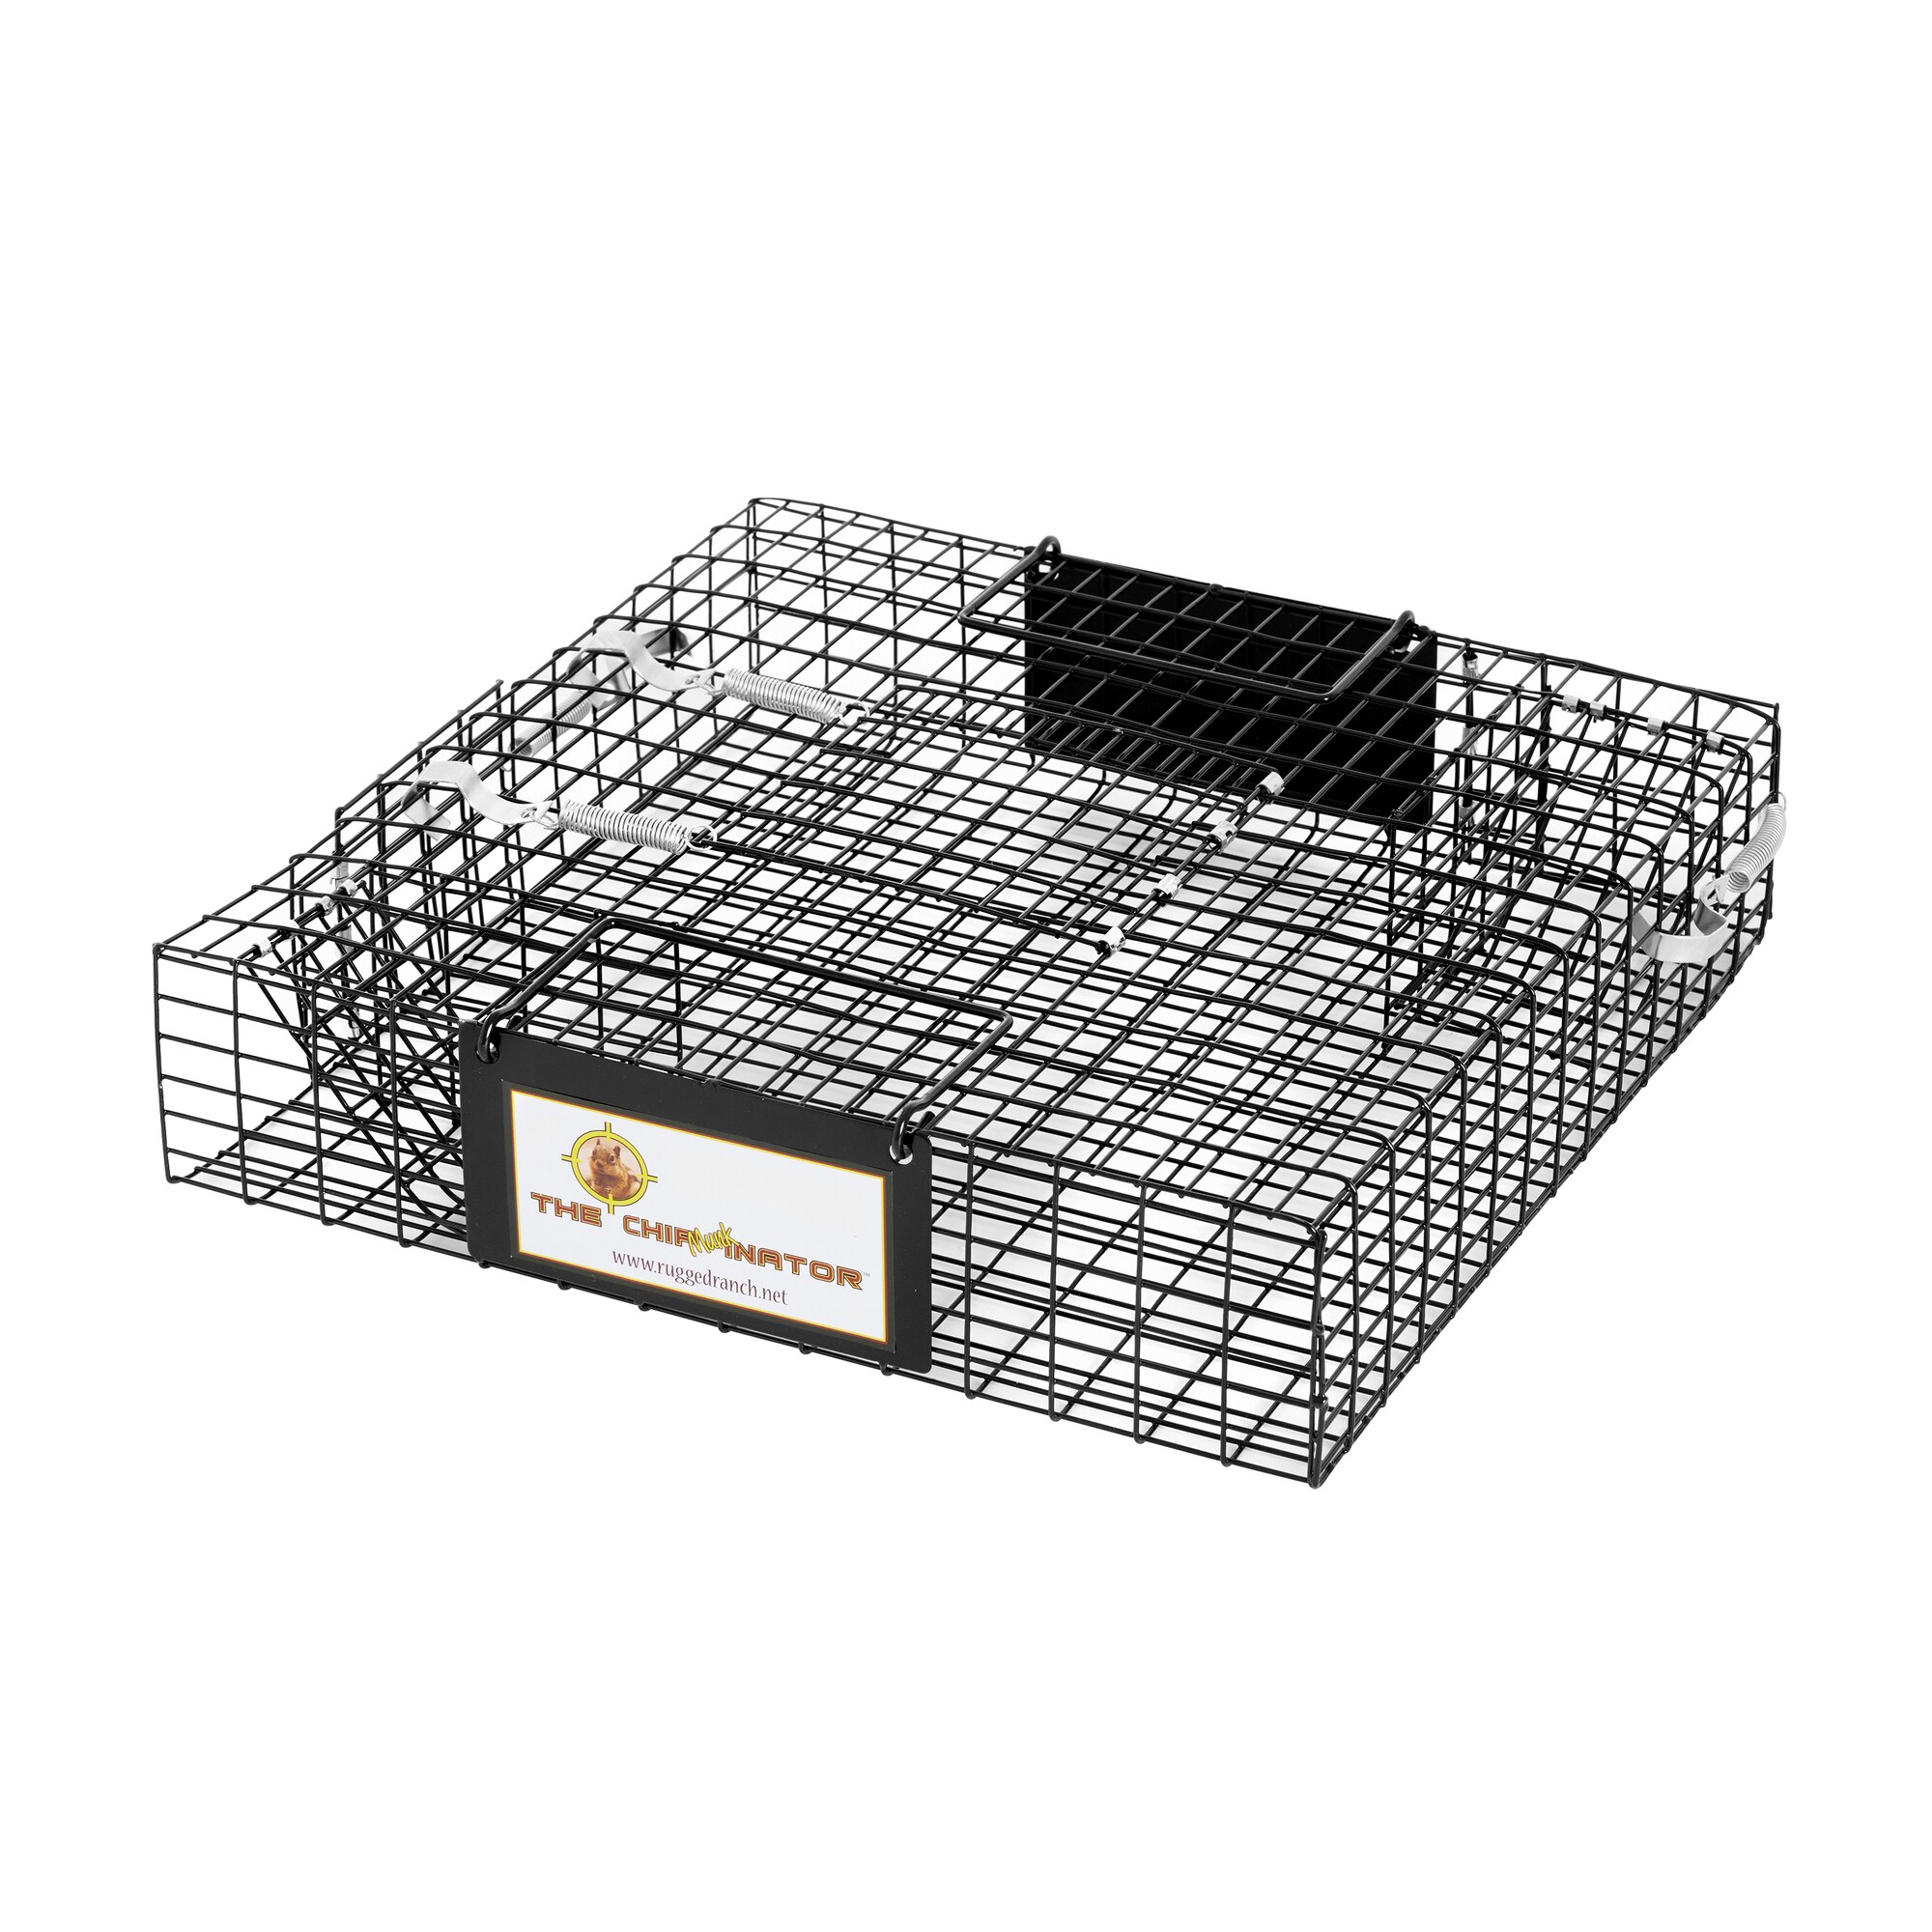 Rugged Ranch SQR Squirrelinator Live Squirrel Chipmunk Metal 2 Door Trap  Cage - Outdoor Animal & Rodent Control - Safer for Pets & Kids - 1 Count in  the Animal & Rodent